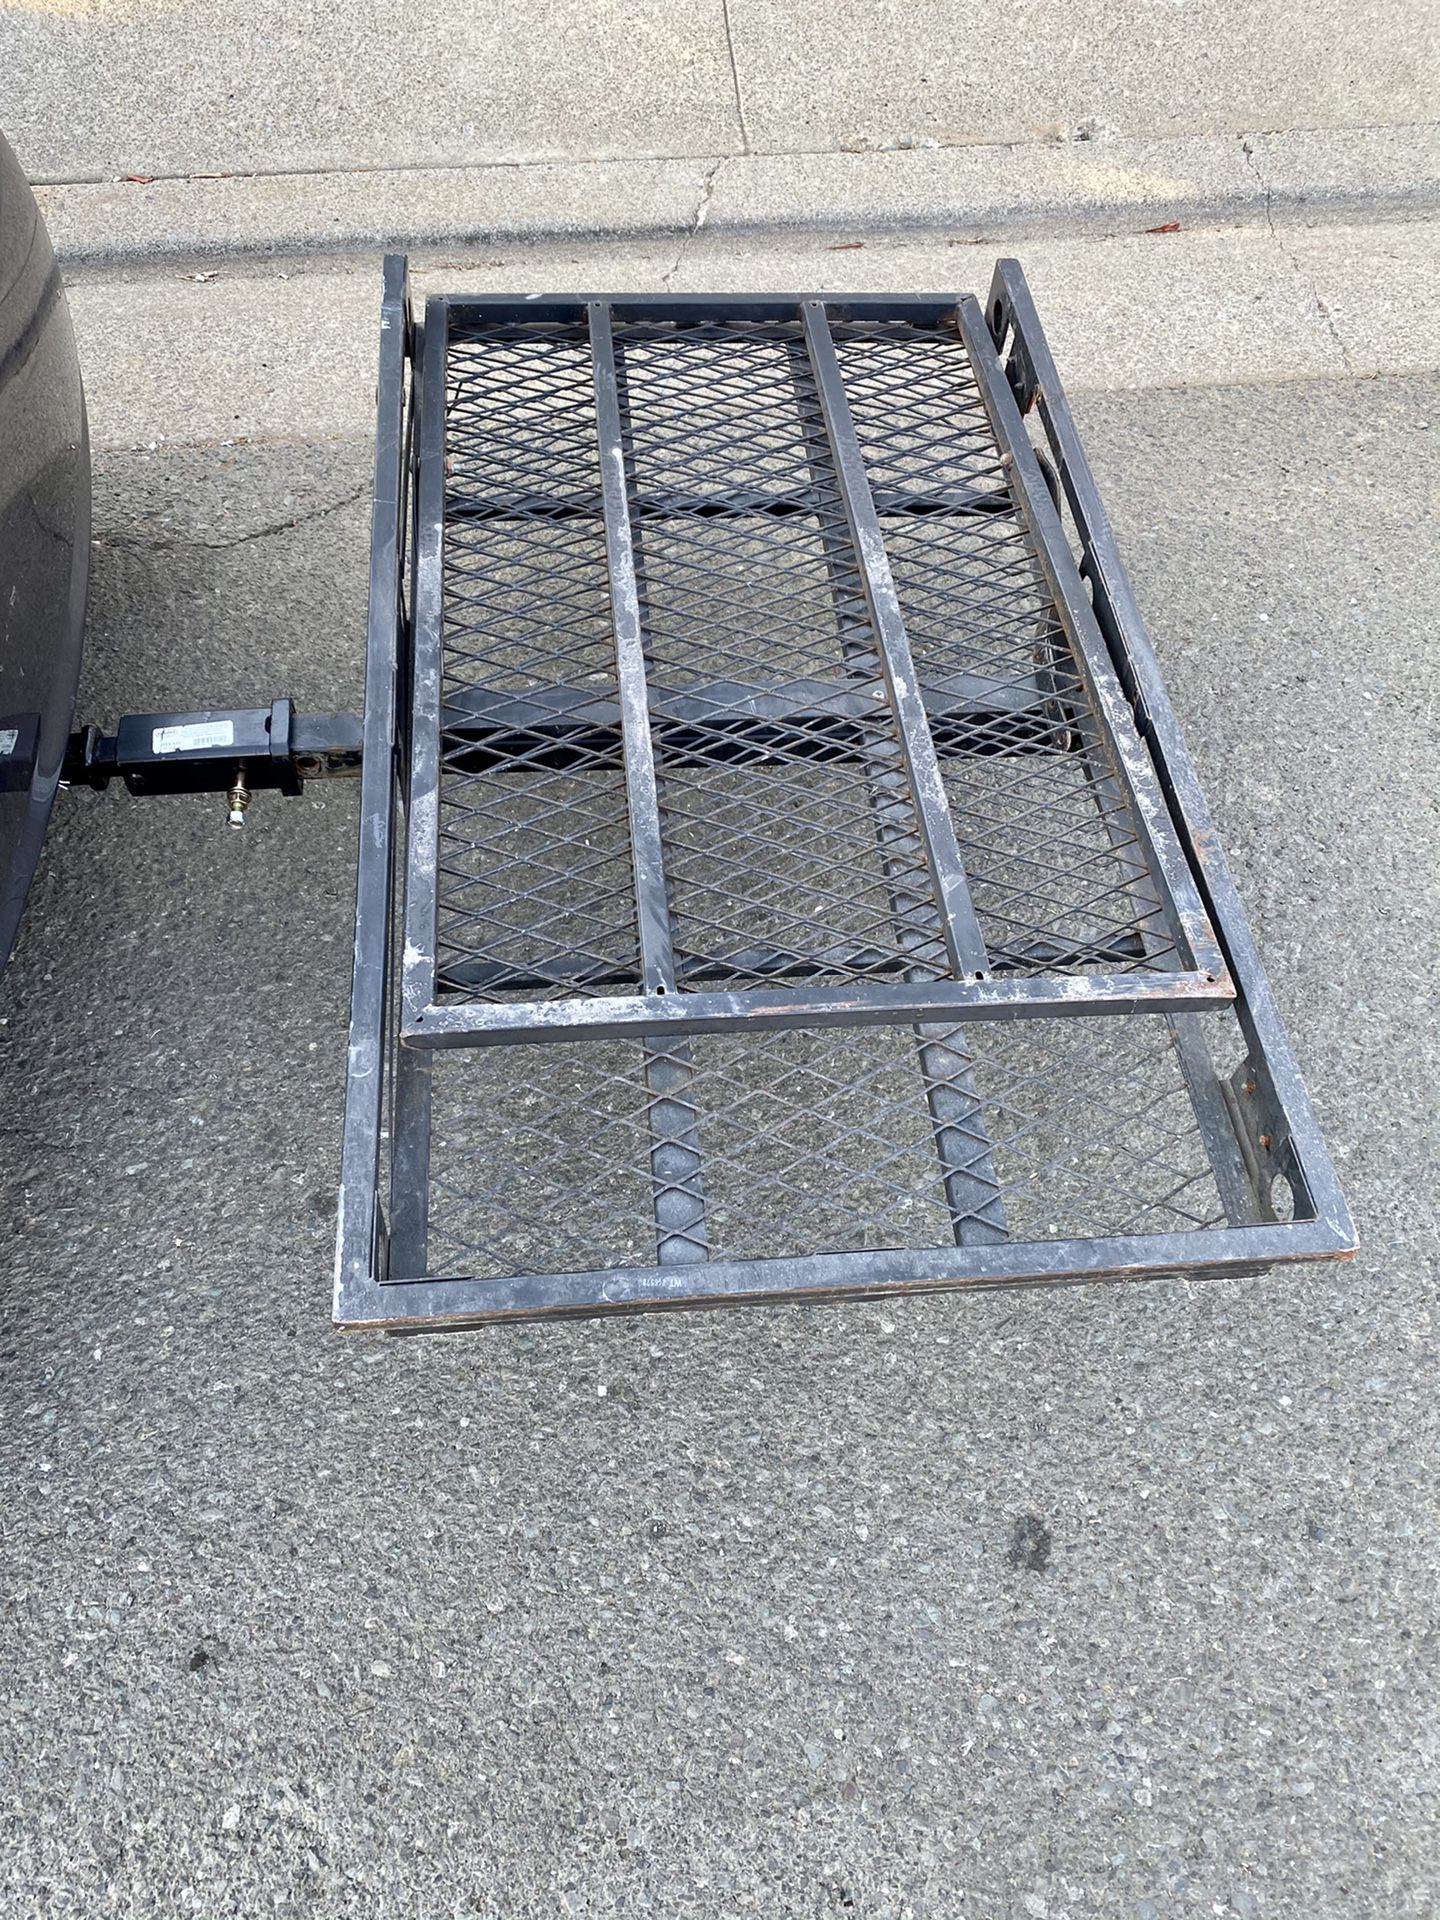 Tow rack with ramp